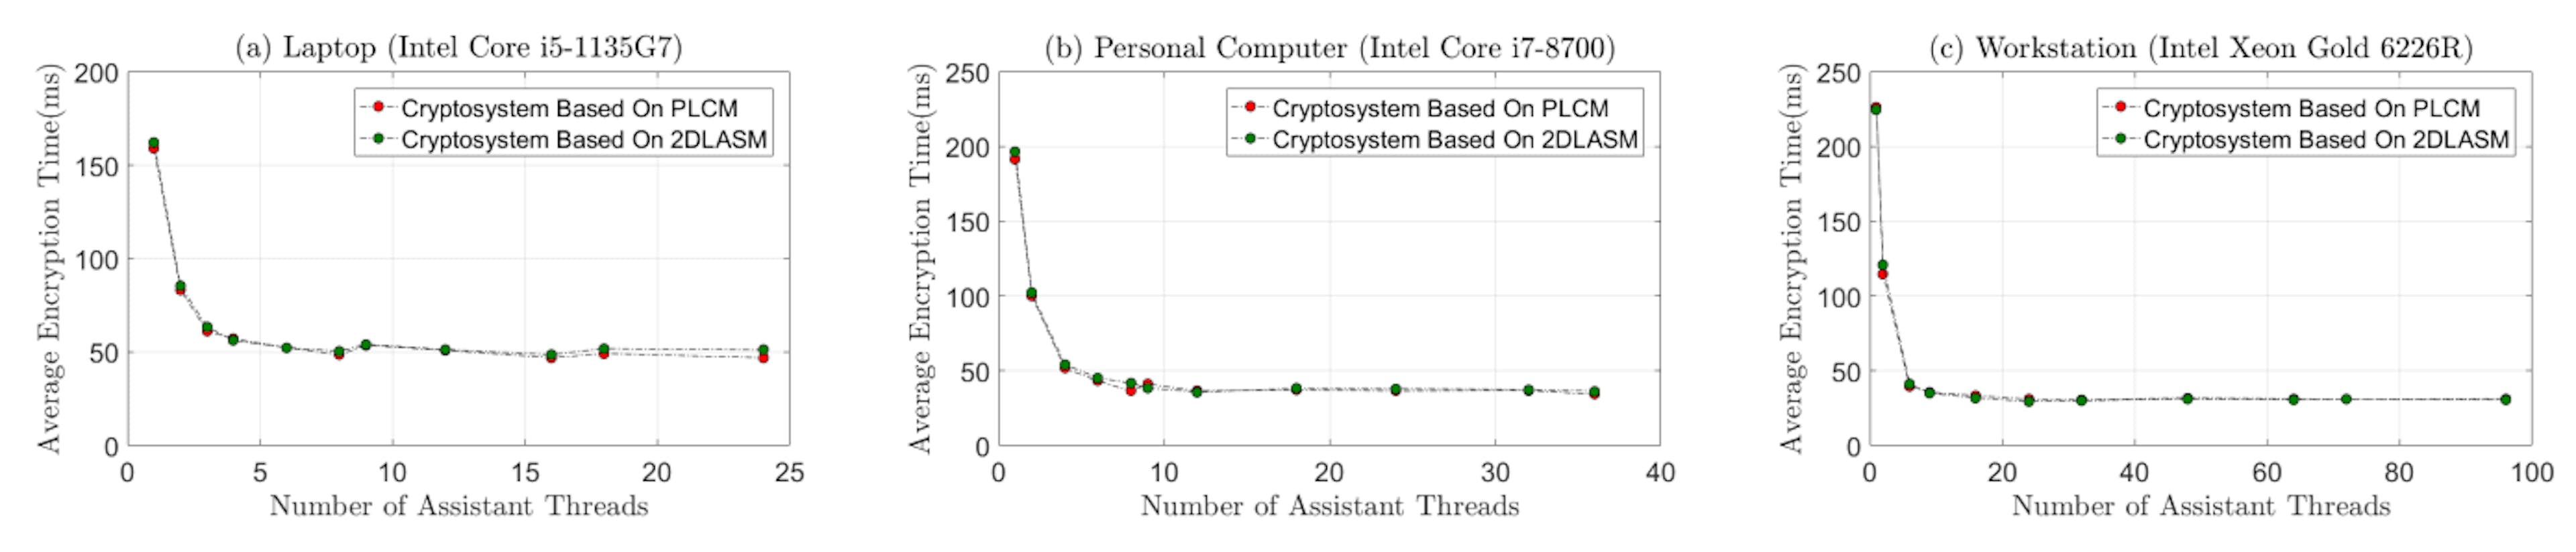 Figure 8: Relationship between the number of assistant threads and the encryption speed, (a) results of the laptop (Intel Core i5-1135G7), (b) results of the personal computer (Intel Core i7-8700G7), (c) results of the workstation (Intel Xeon Gold 6226R).